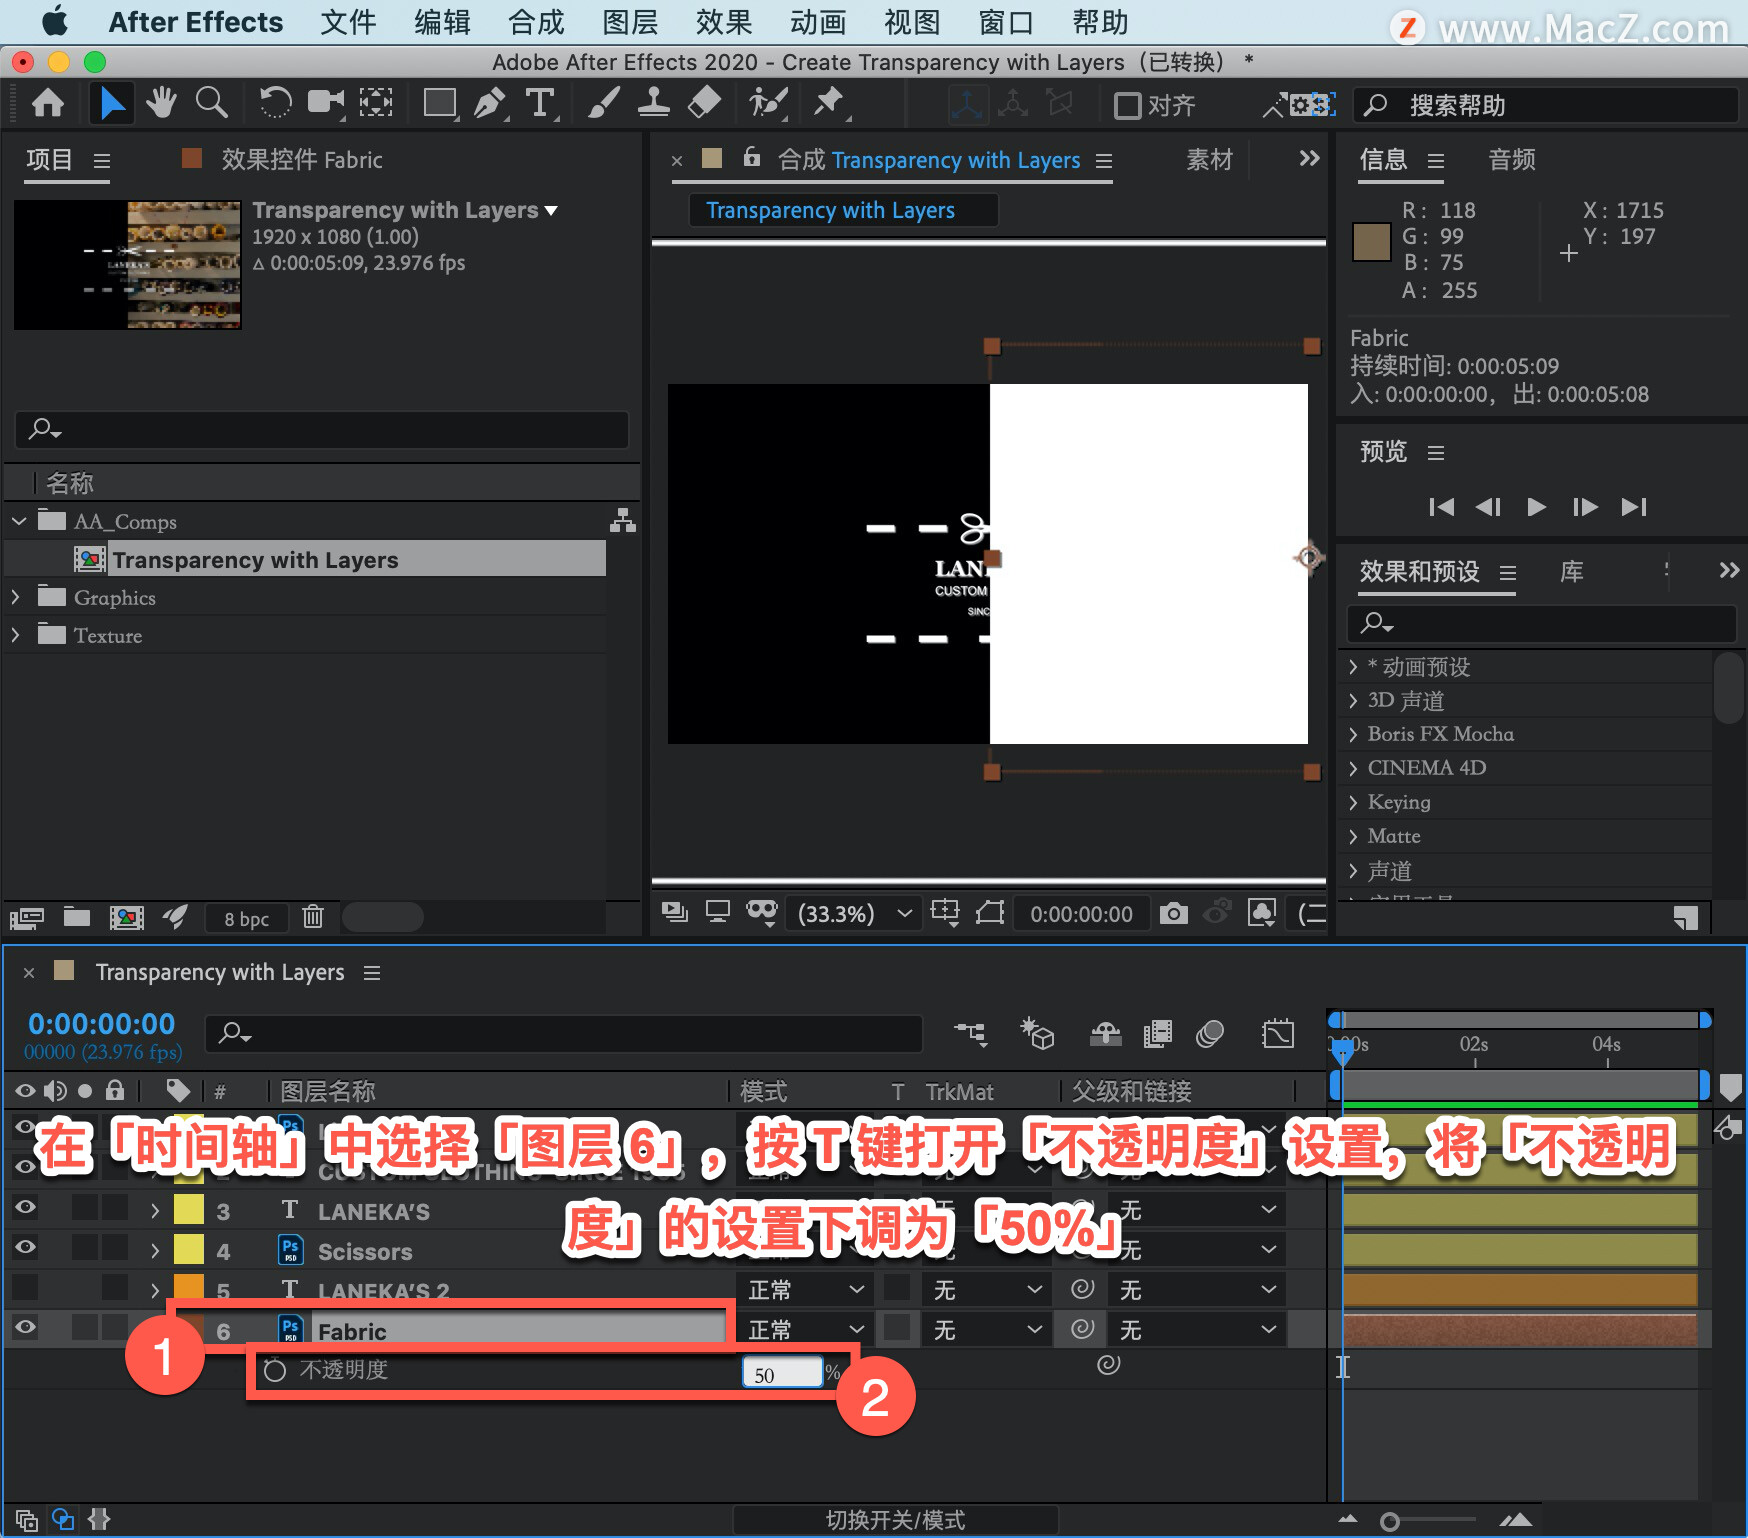 After Effects 教程「29」，如何在 After Effects 中设置图层不透明度？